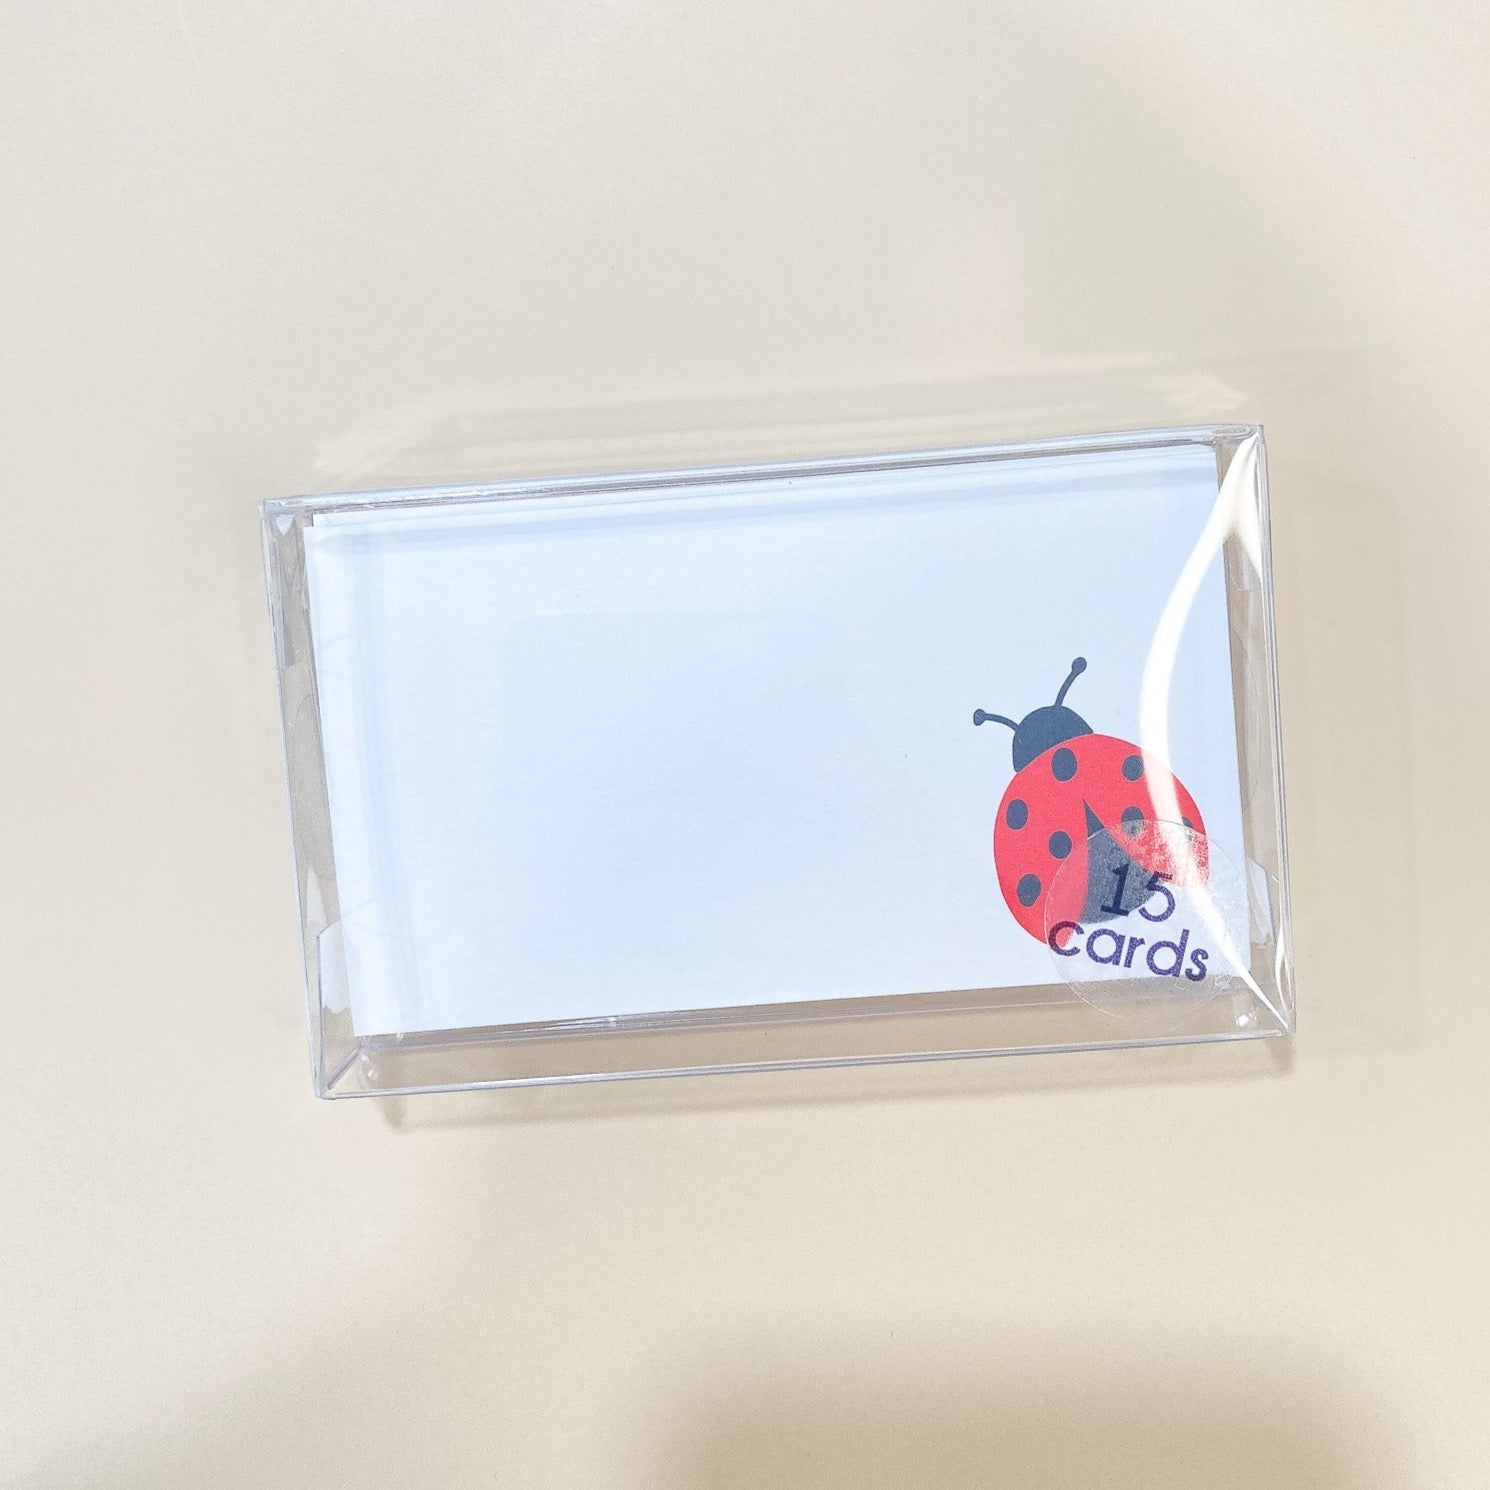 This collection features charming cards measuring 3.5"x2". They are the perfect size to slip into a lunchbox, attach to a gift, or tuck into the pocket of a loved one. The Lady Bug Bitty Note is a simple and sweet addition to any bitty message. 